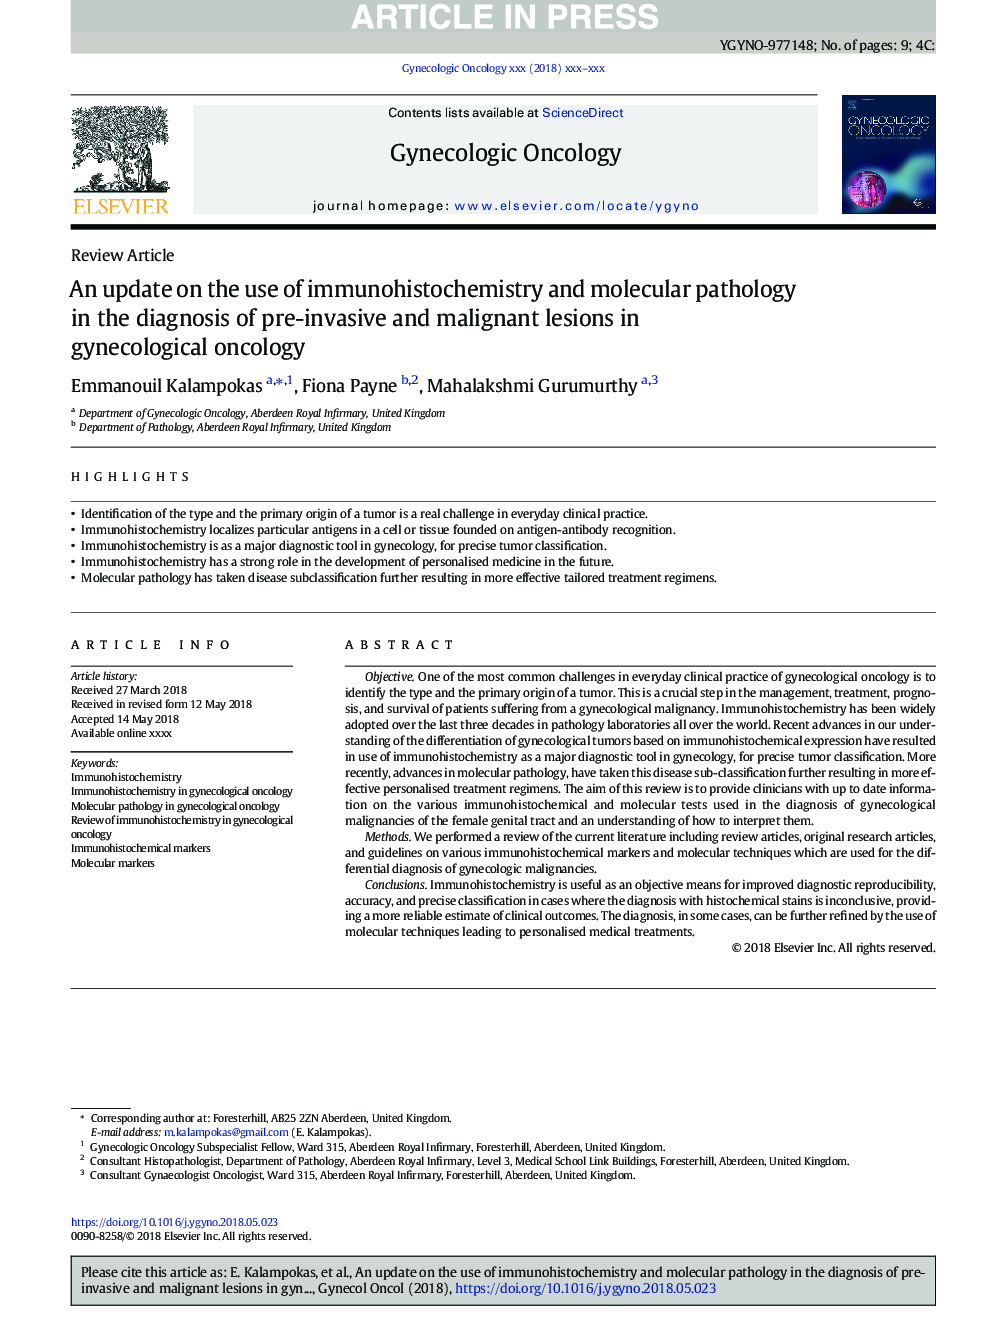 An update on the use of immunohistochemistry and molecular pathology in the diagnosis of pre-invasive and malignant lesions in gynecological oncology